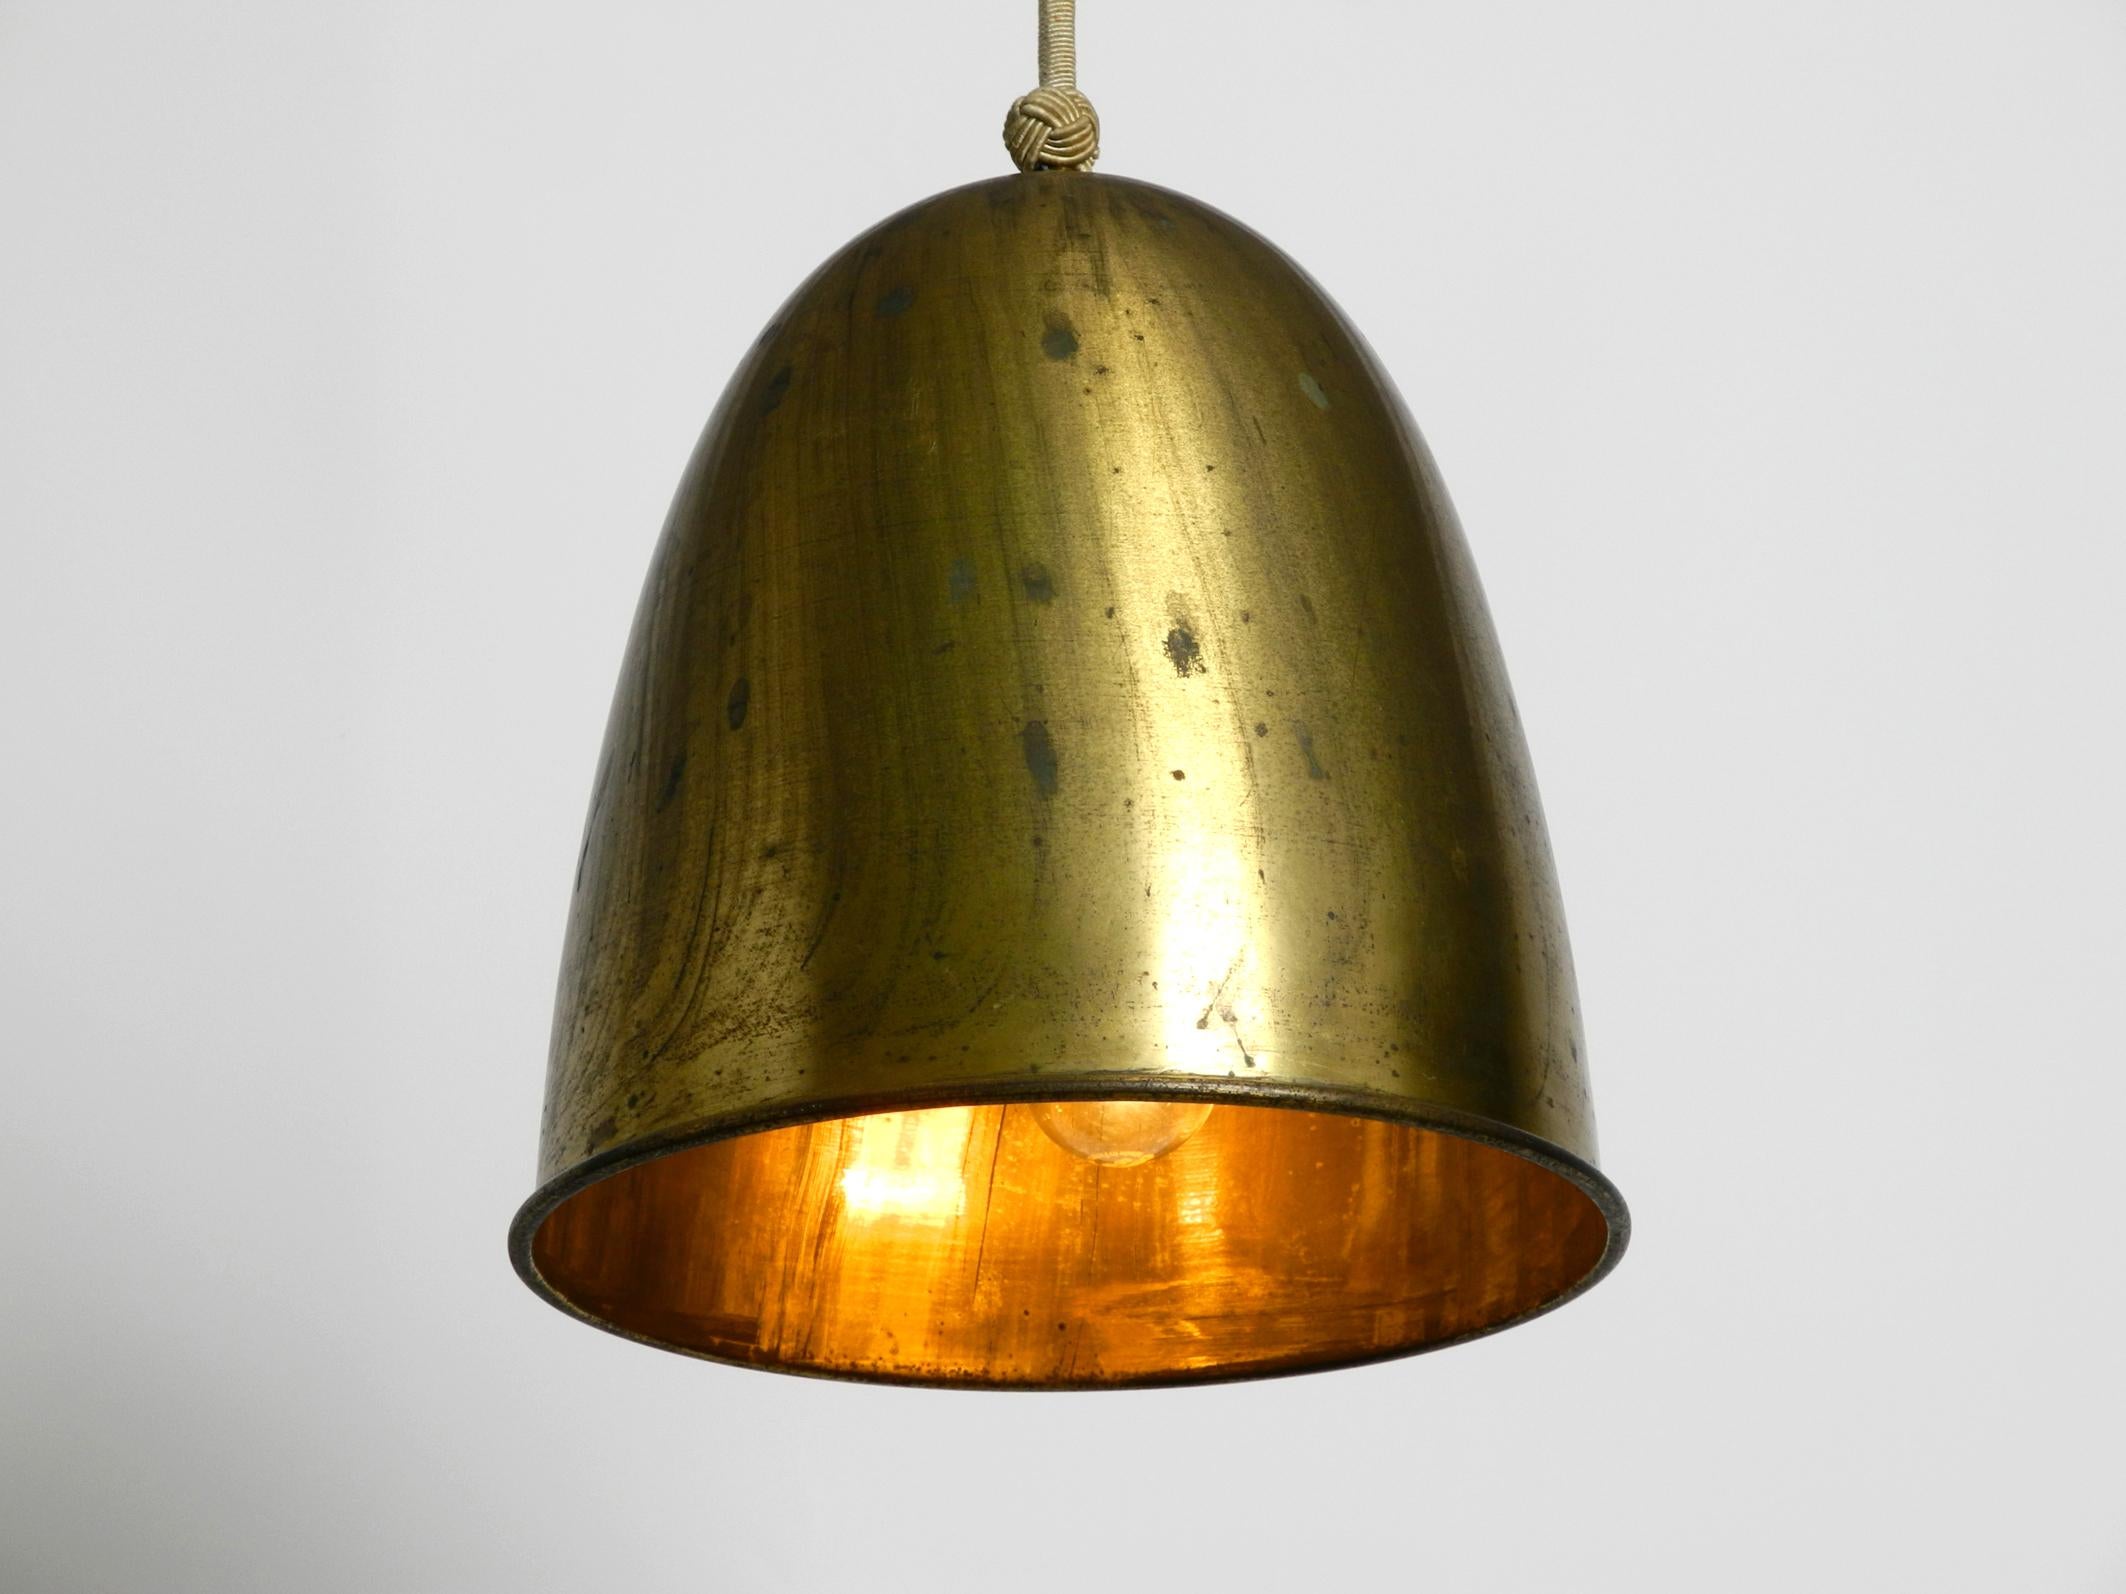 Very rare and large heavy midcentury brass pendant lamp with brass shade. Three original E27 sockets inside the lampshade.
Exceptional design in original condition.
Lampshade is made of solid, heavy brass with a very nice patina.
This lamp hung